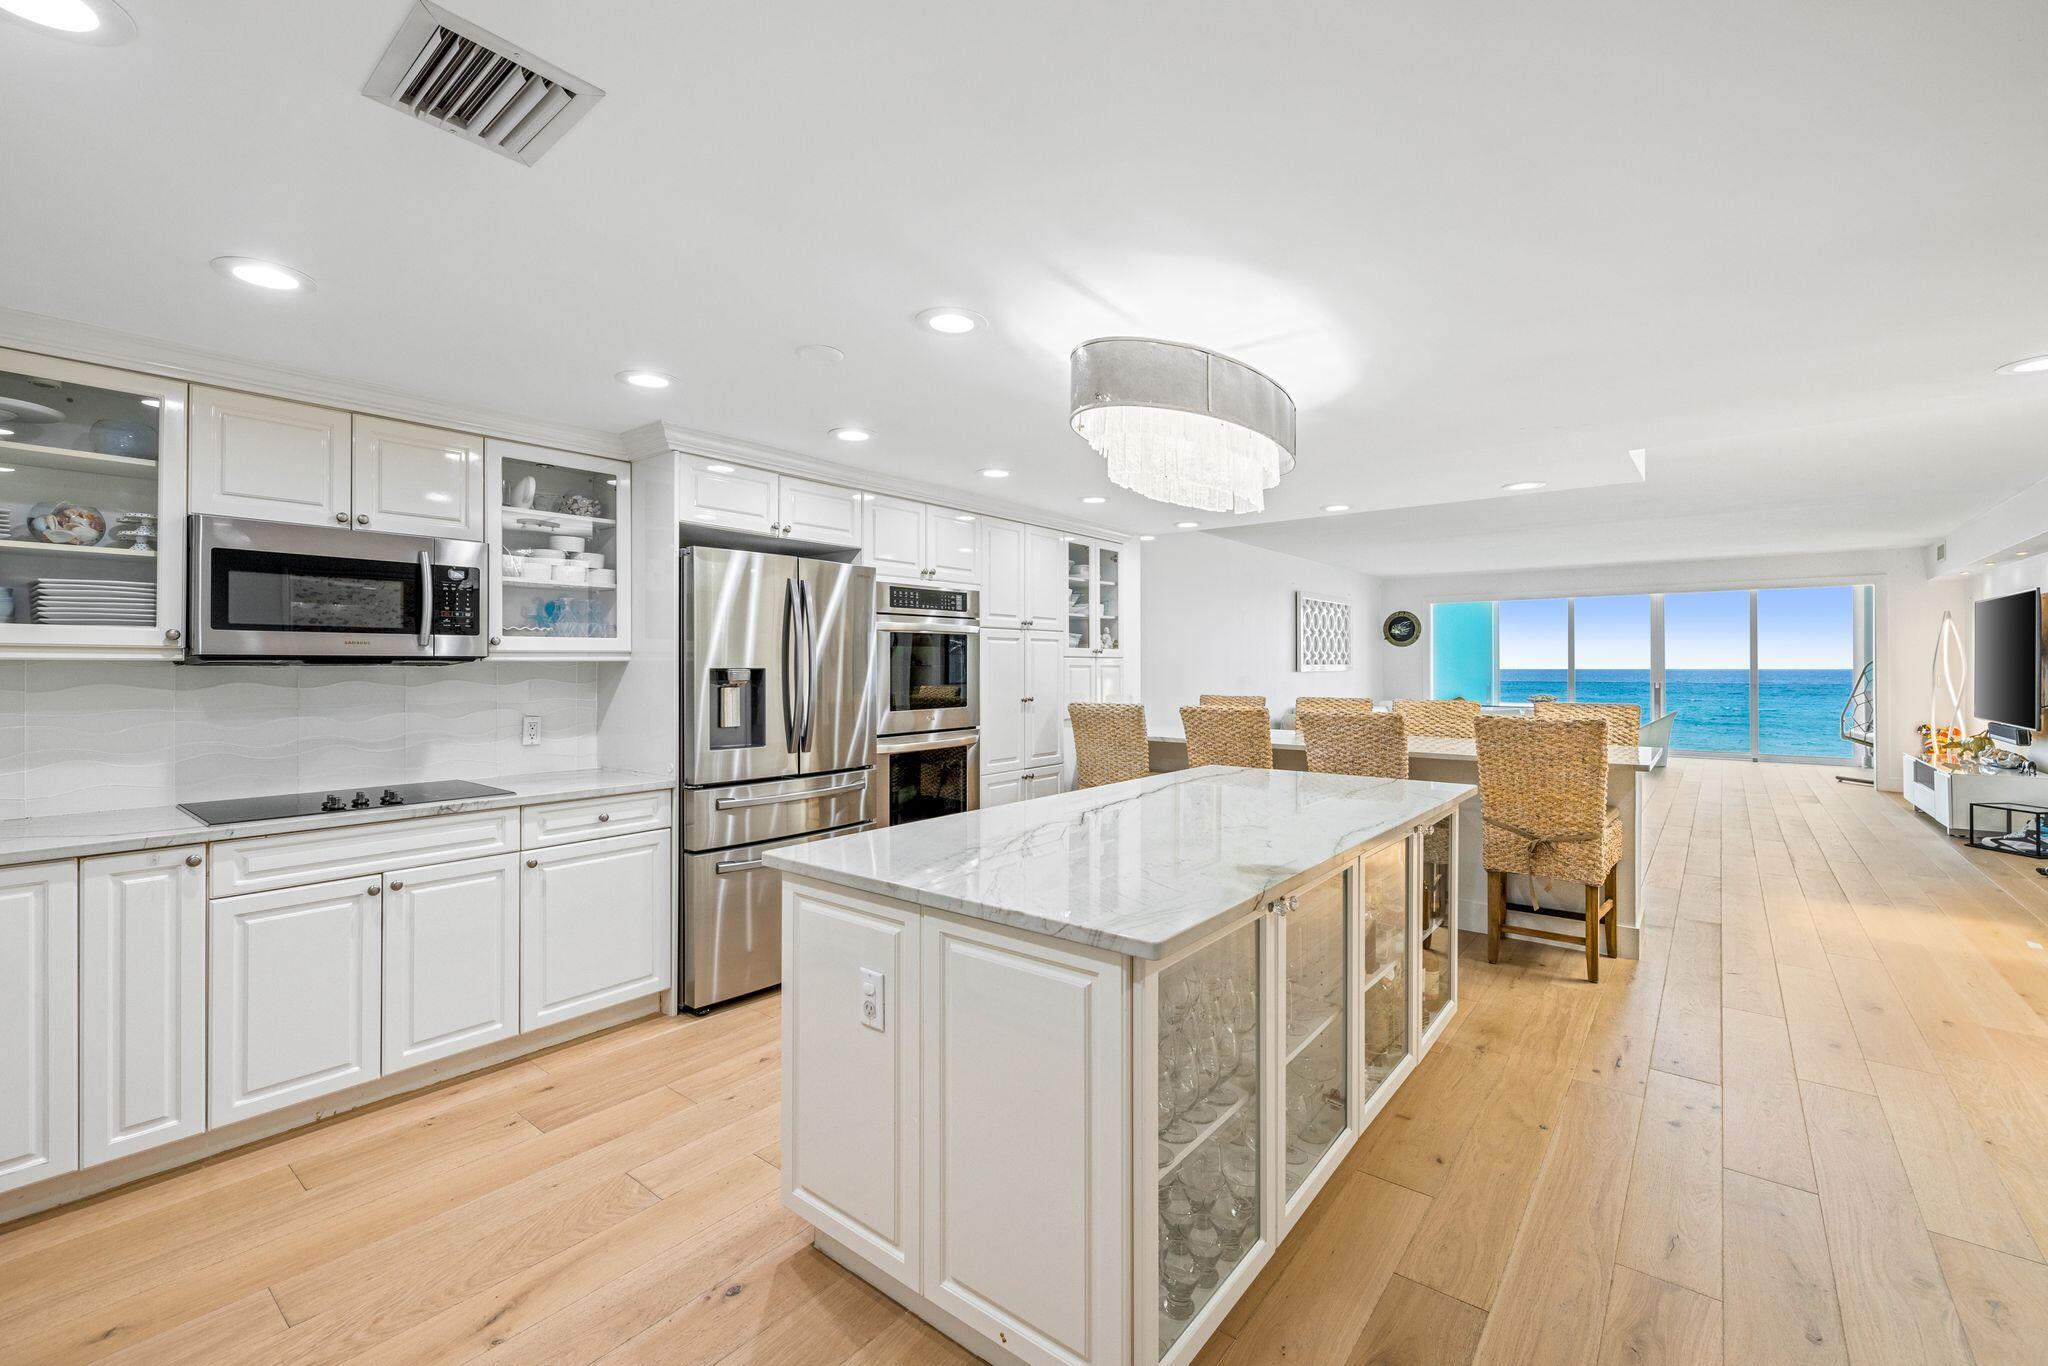 a large kitchen with stainless steel appliances kitchen island a stove a refrigerator a microwave oven a dining table and chairs with wooden floor